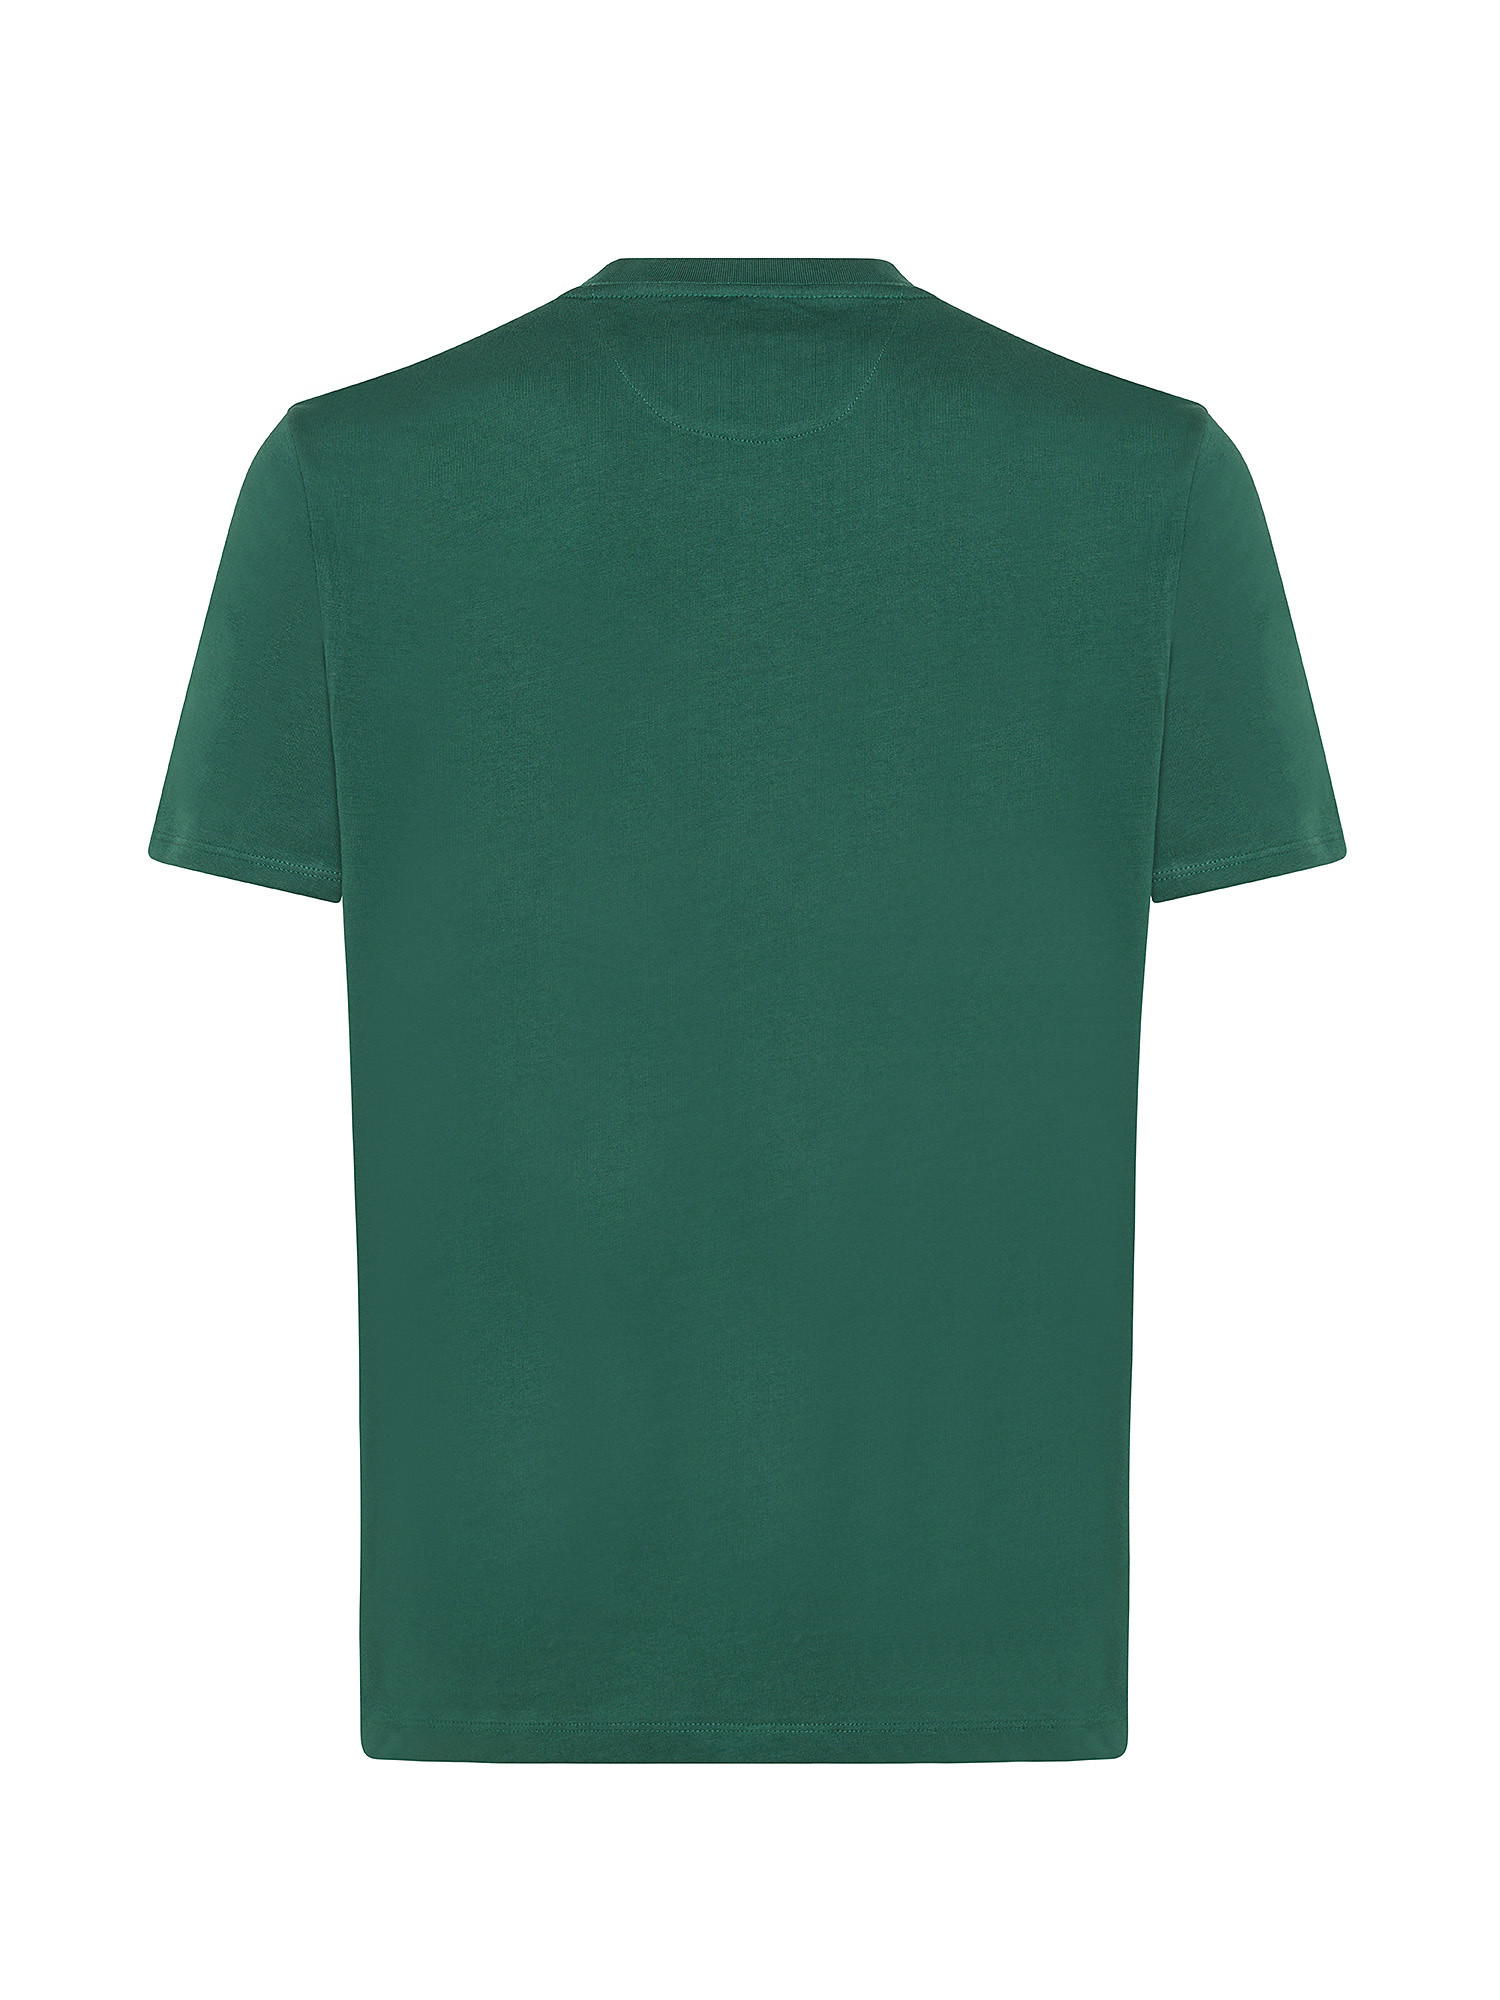 JCT - T-shirt in puro cotone supima, Verde scuro, large image number 1